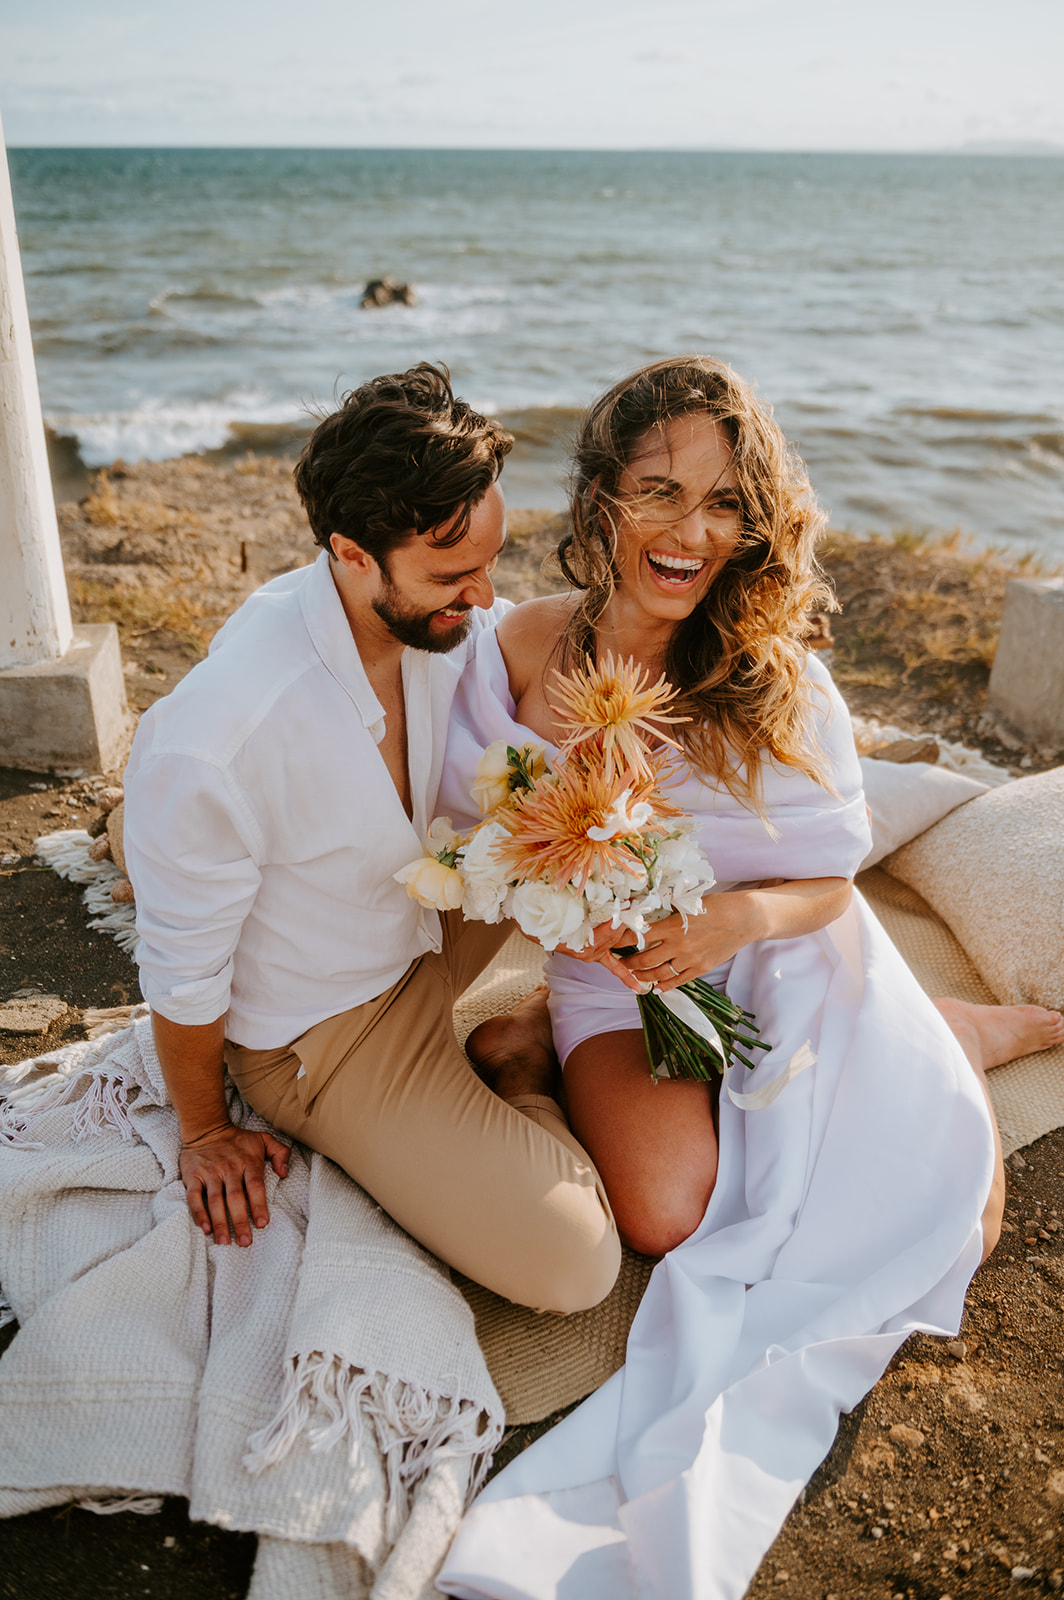 A couple eloping on the cliffs of Penon Guacillo in Costa Rica